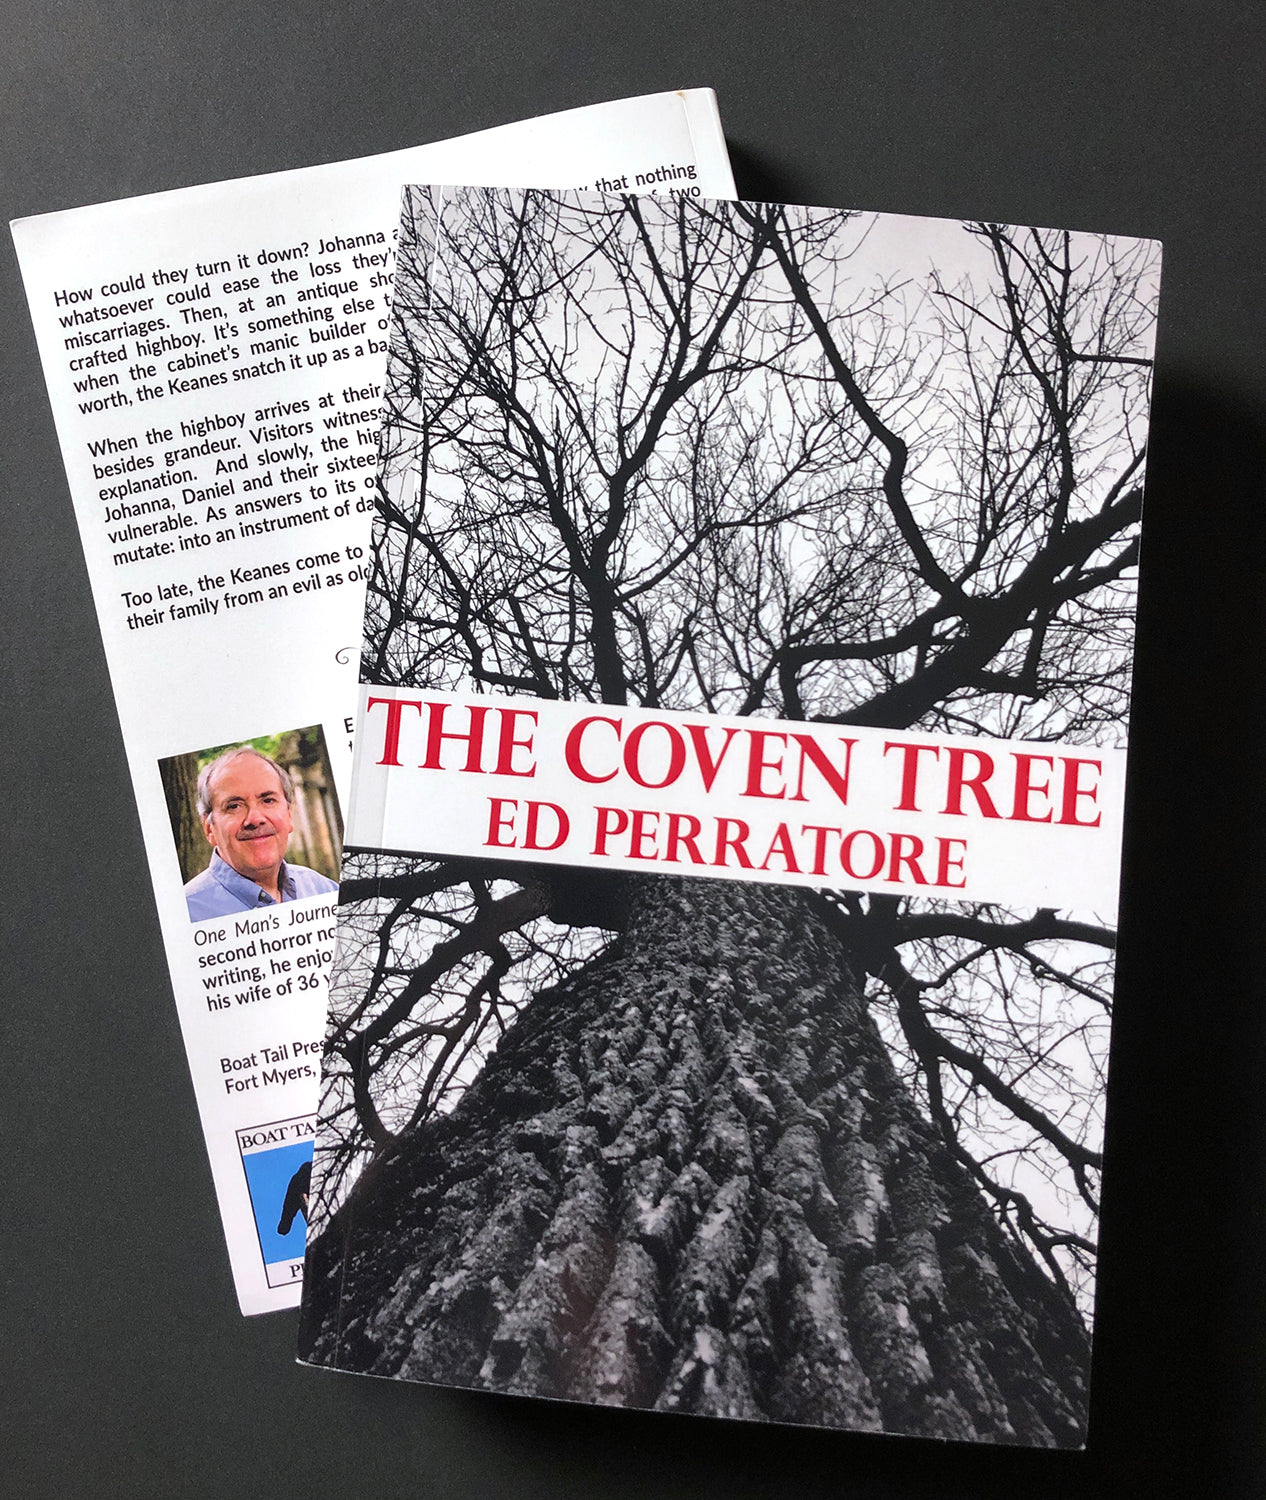 The Coven Tree, a new horror novel by Ed Perratore, with cover photograph by Keith Dotson.